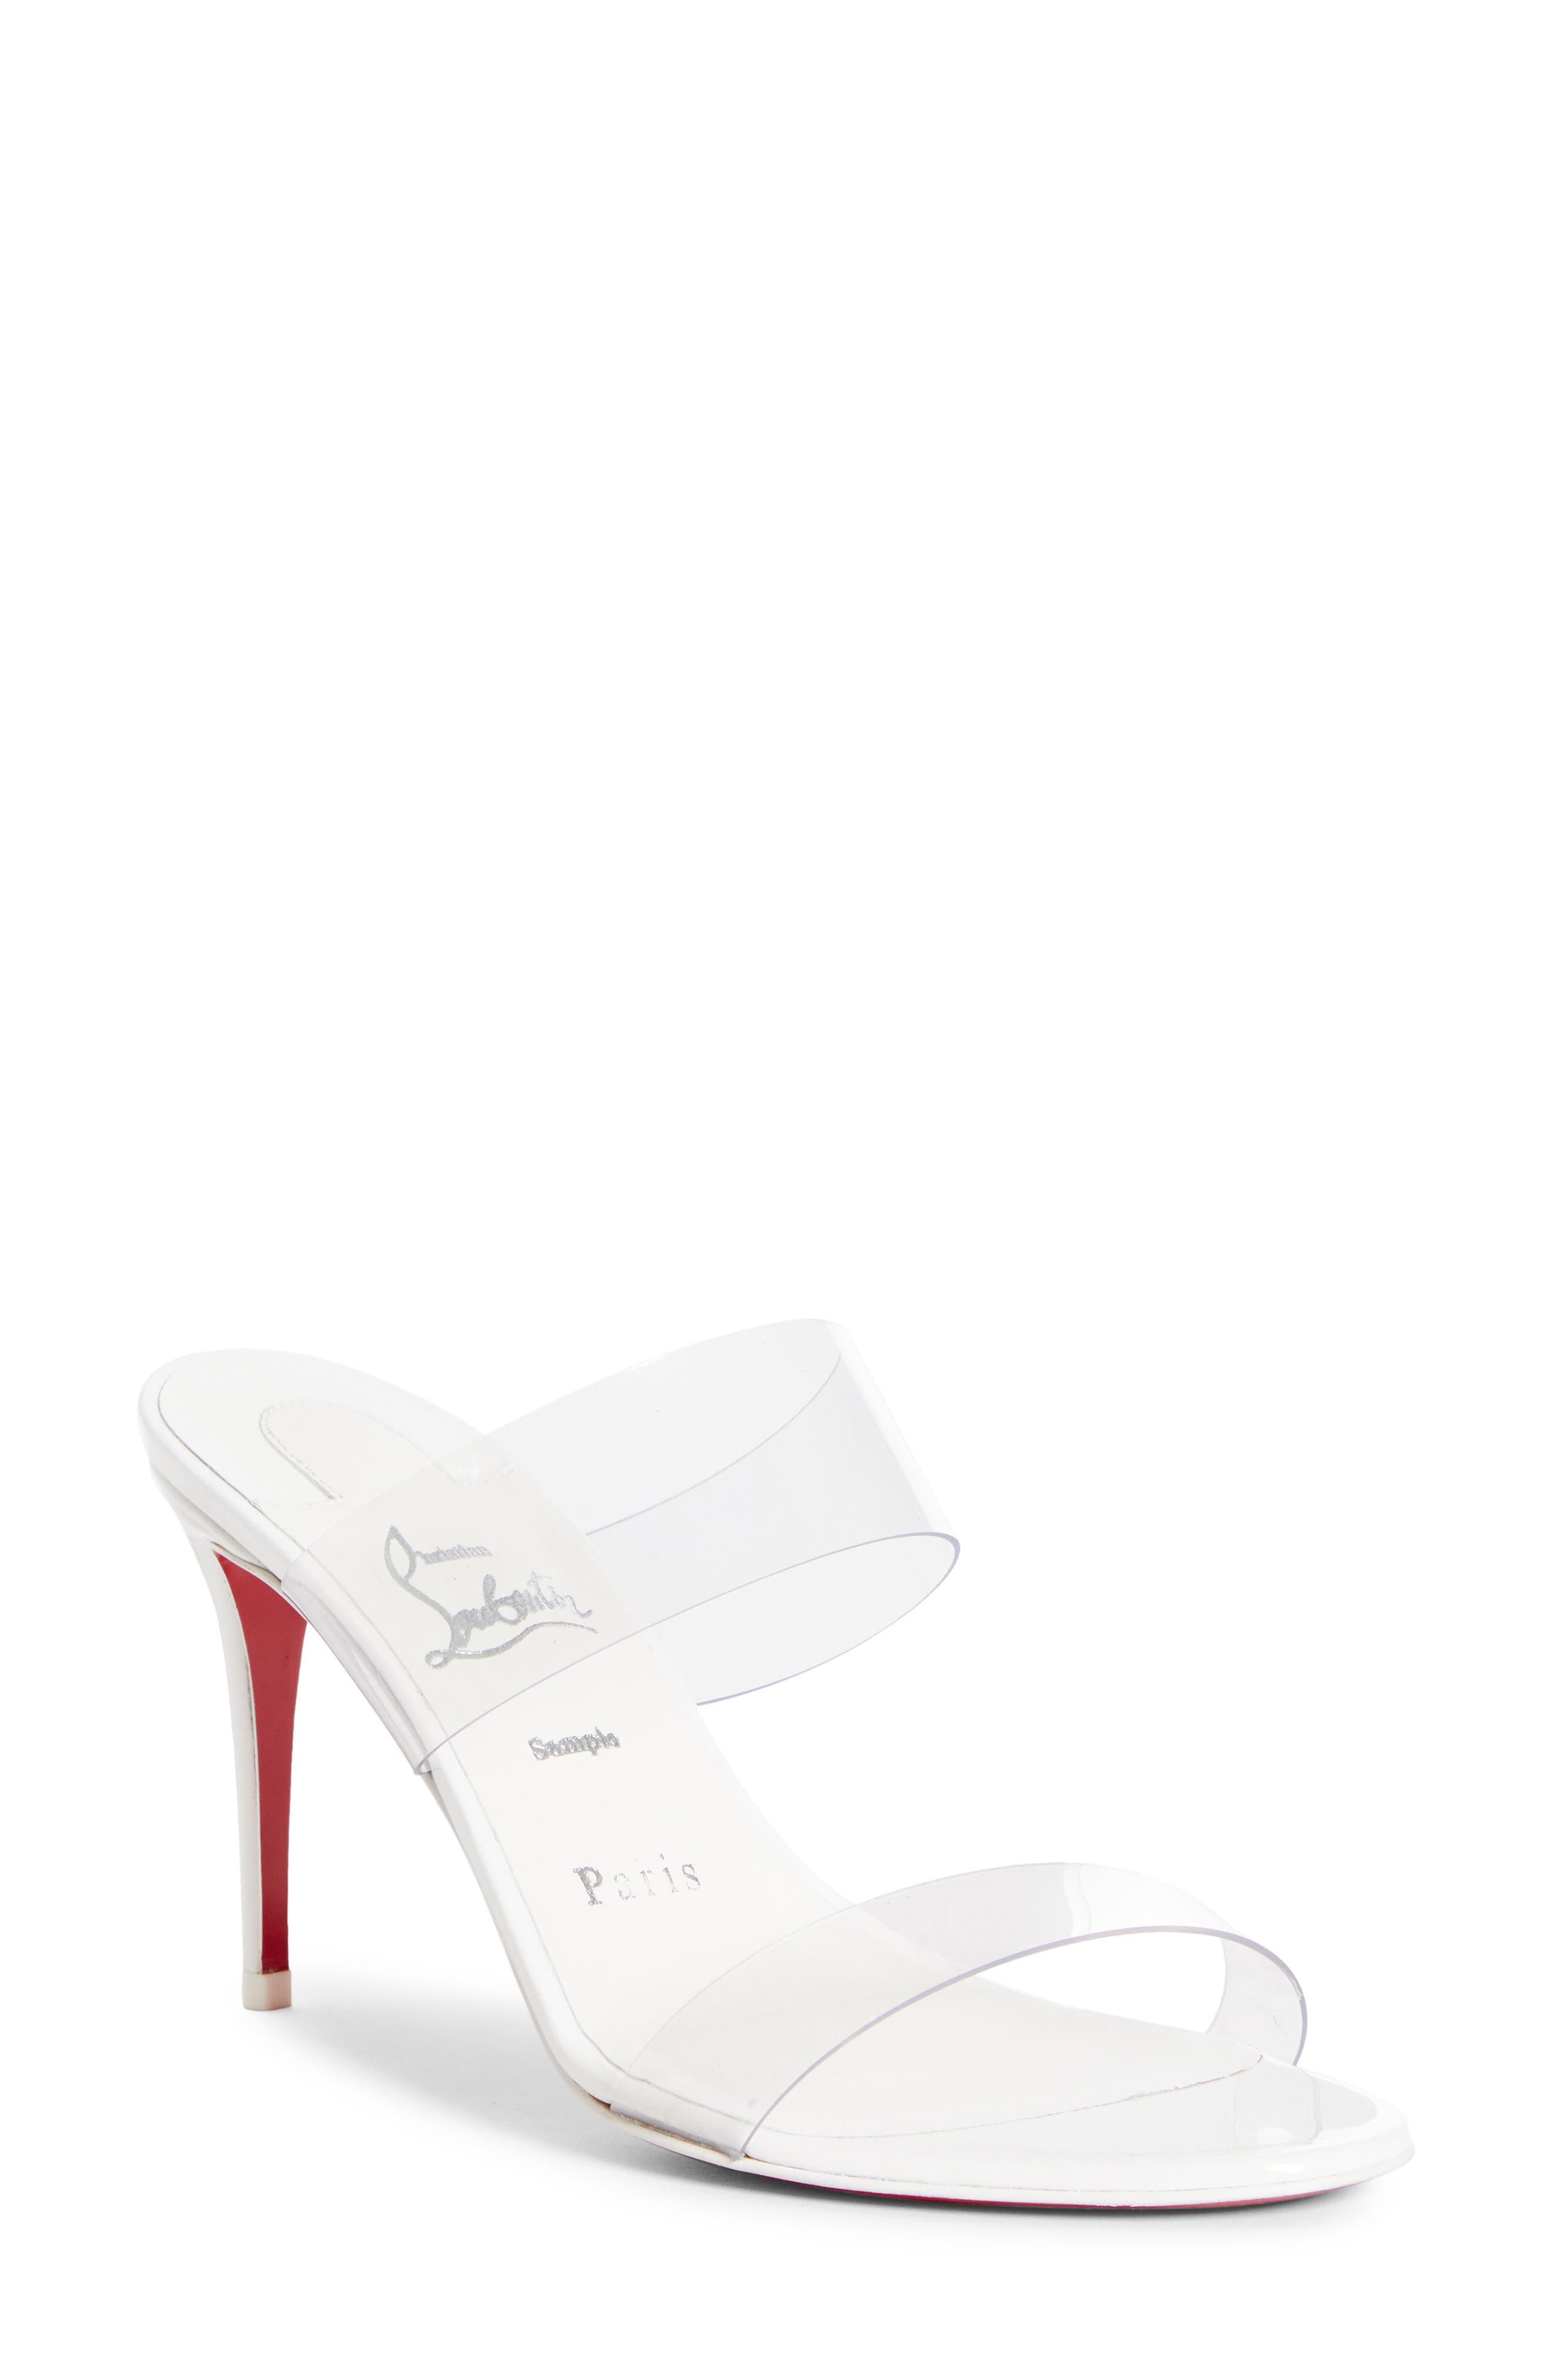 Women's Christian Louboutin Sandals and 